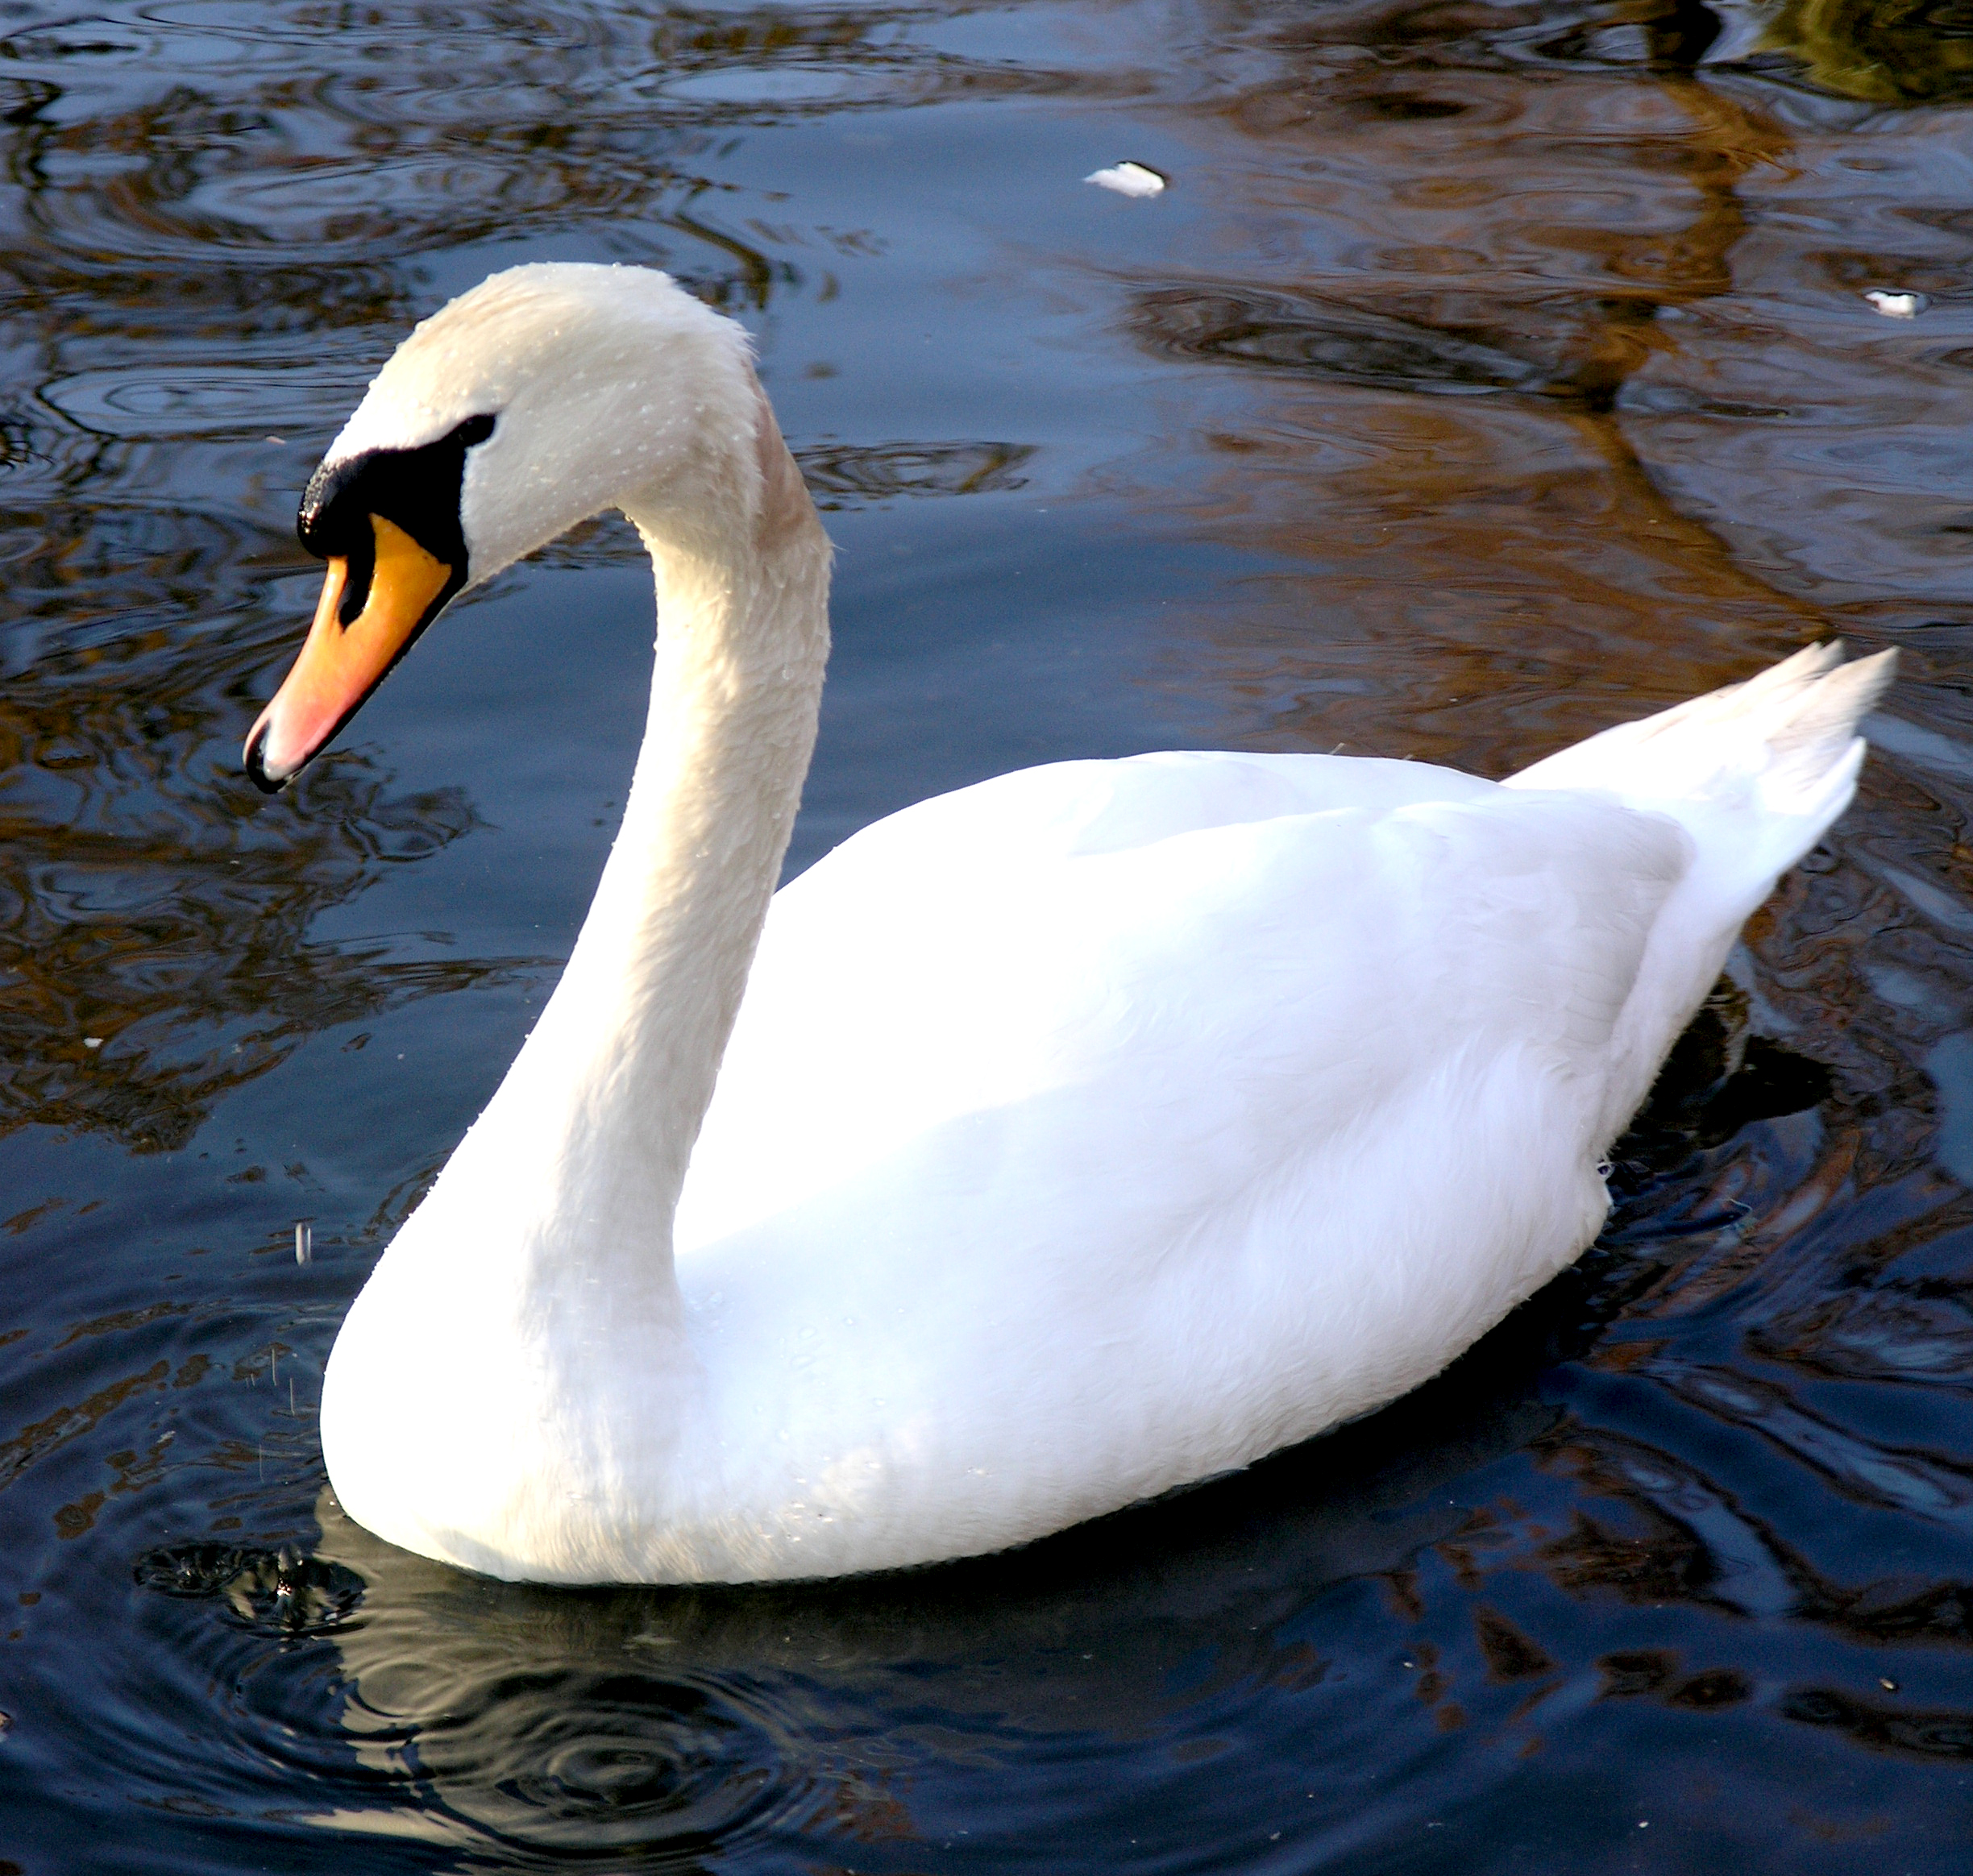 A white swan in water.